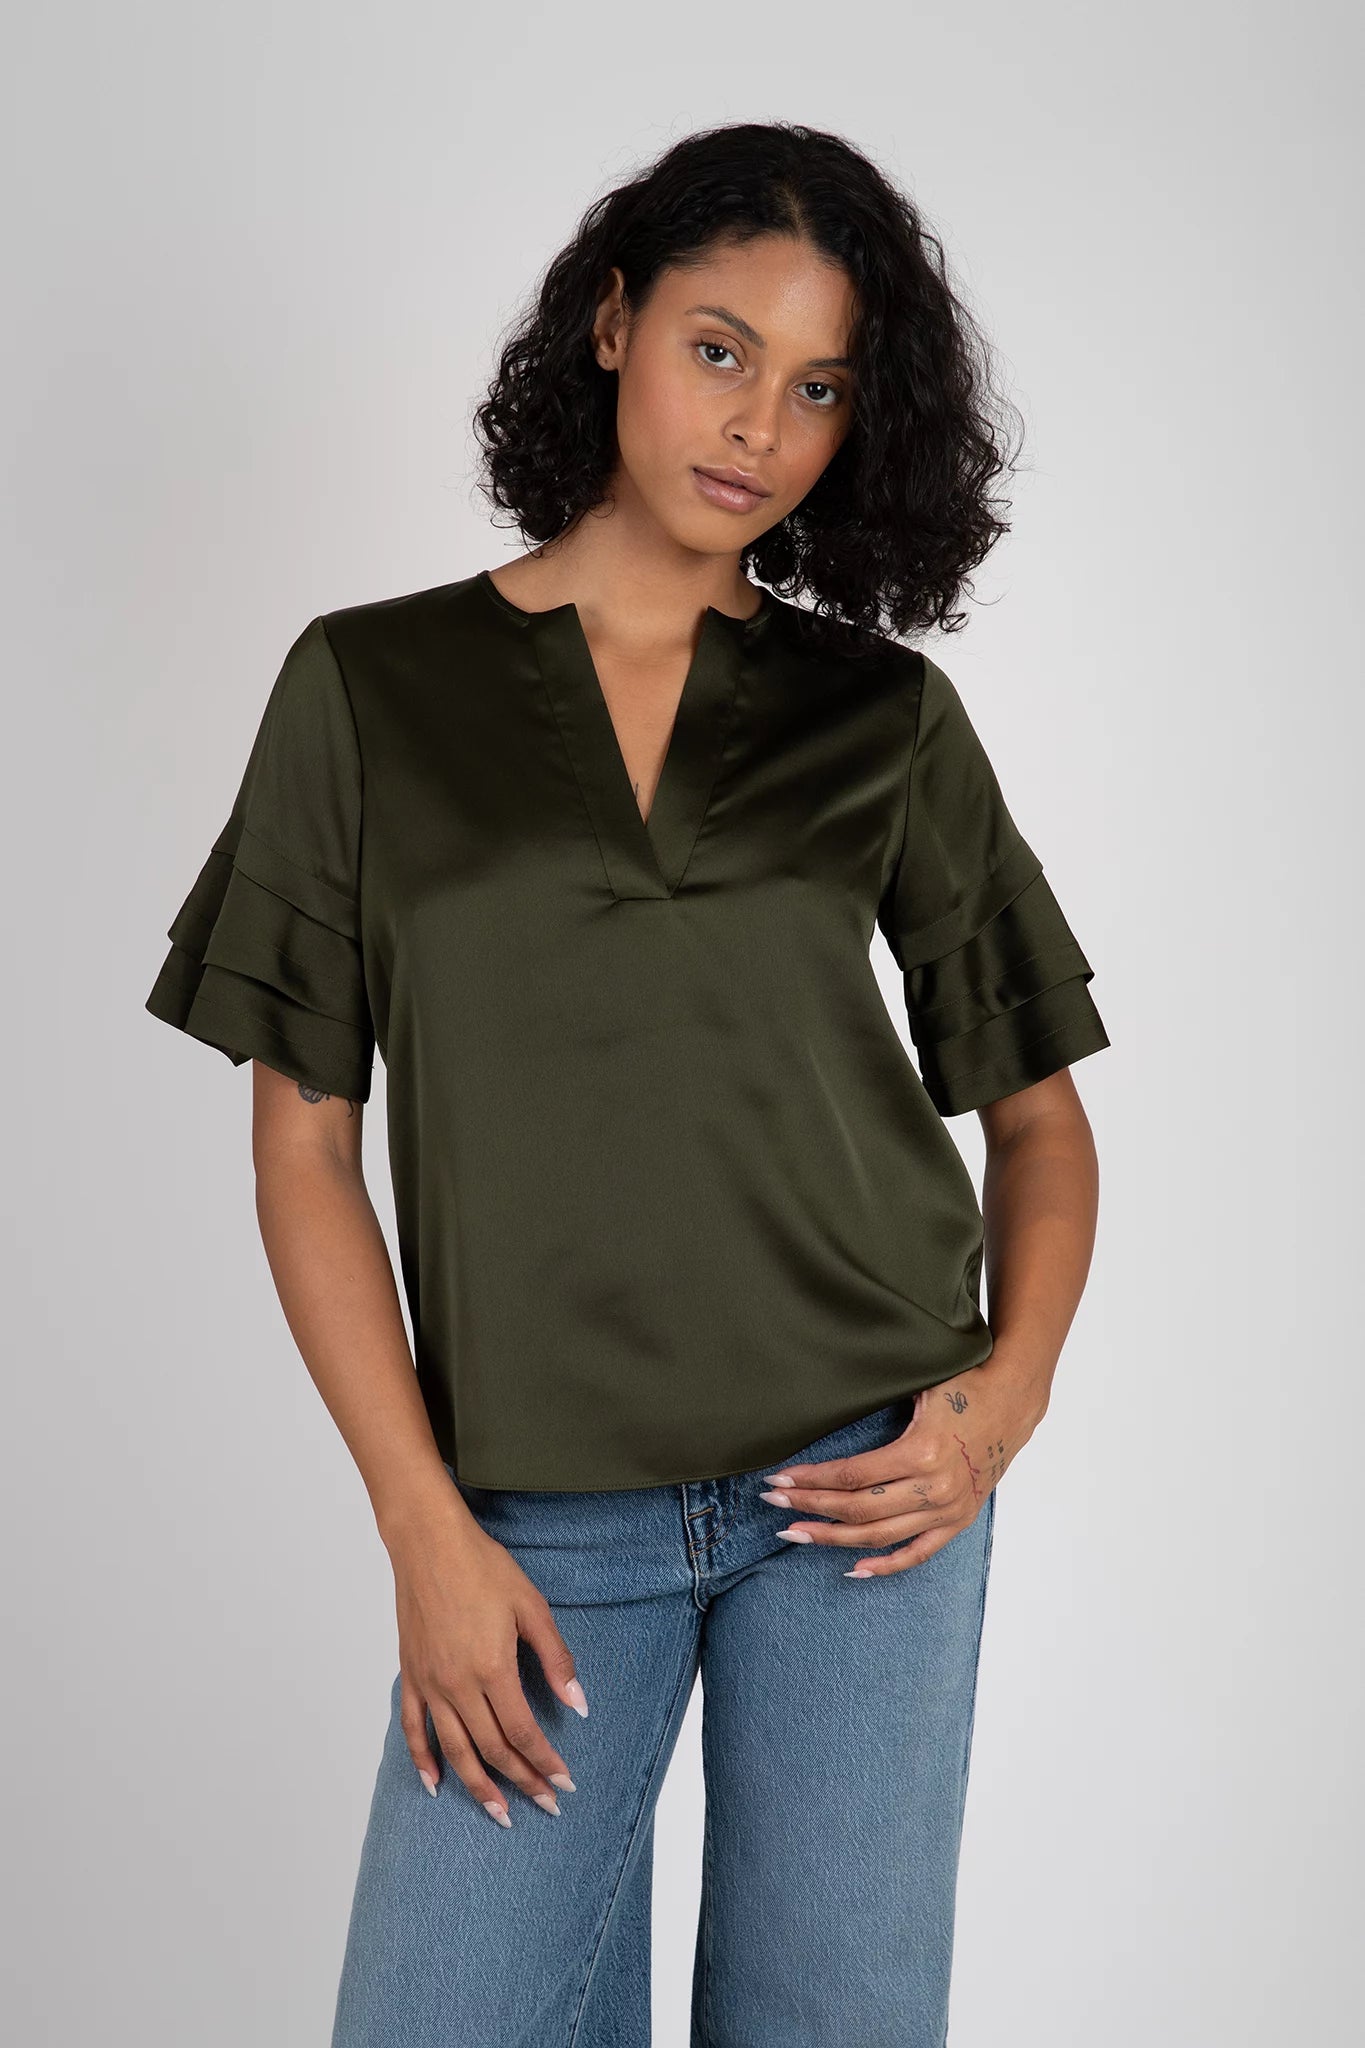 Tiered Ruffle Short Sleeve Blouse Tops FRAME   